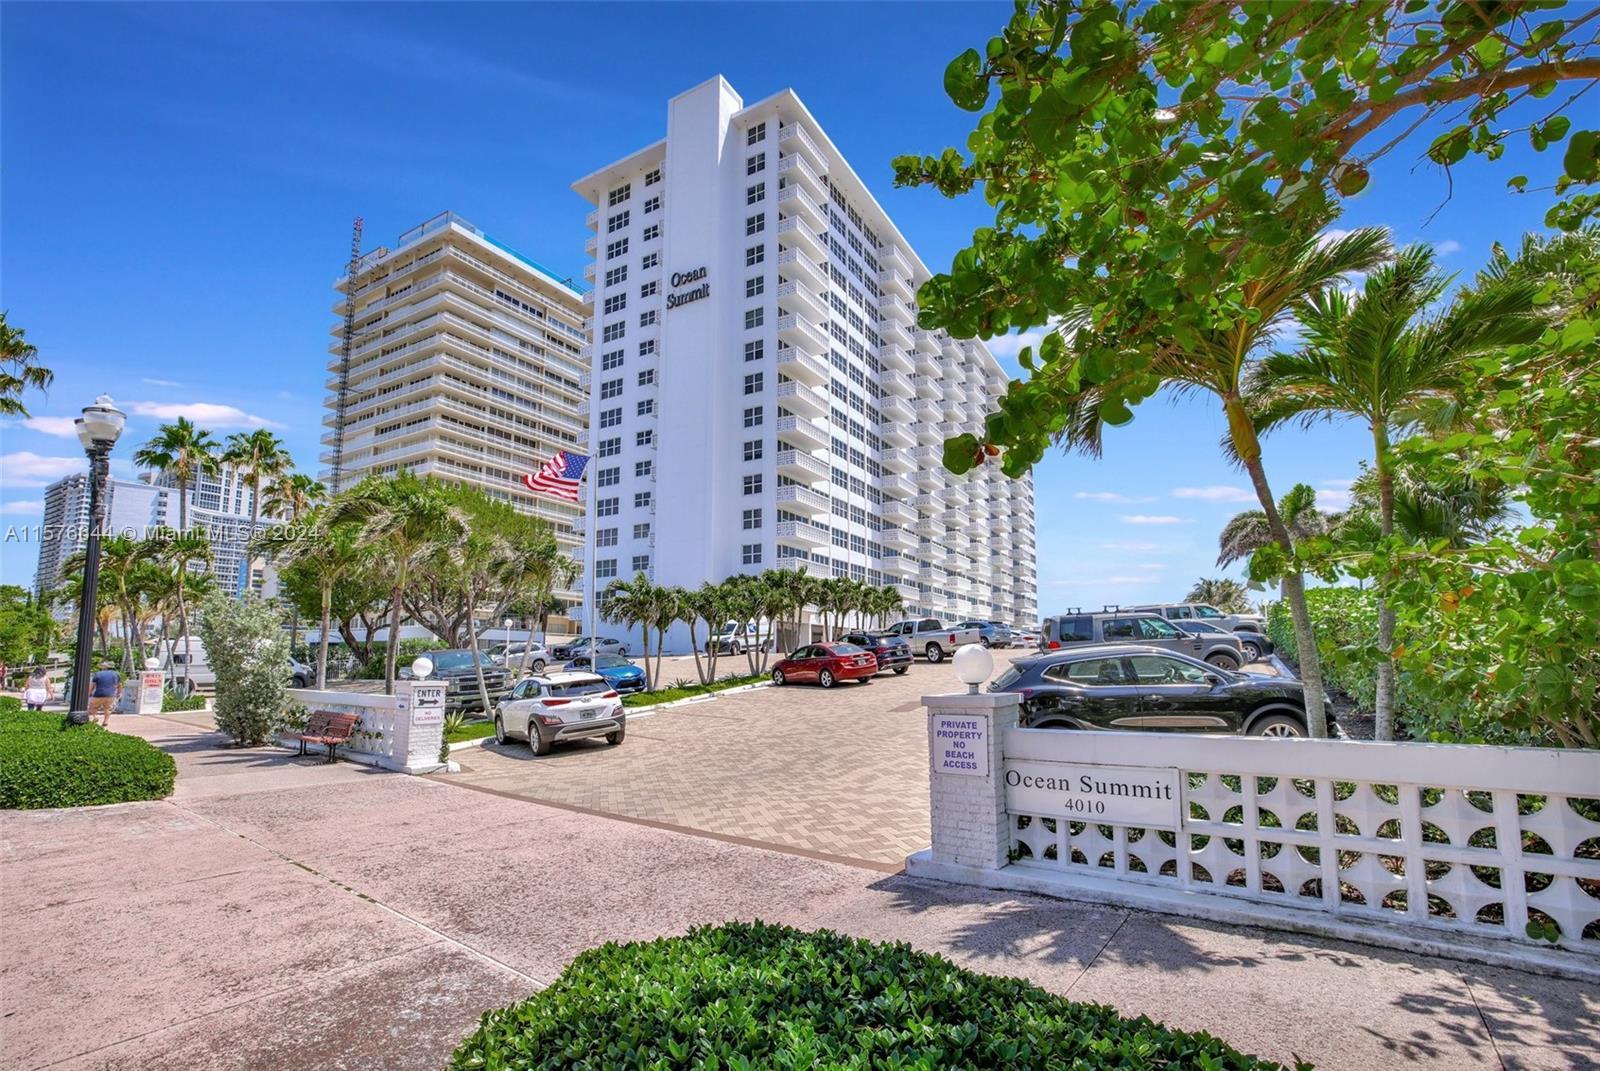 Immaculate spacious light bright carpet free condo with beautiful ocean views located directly on th